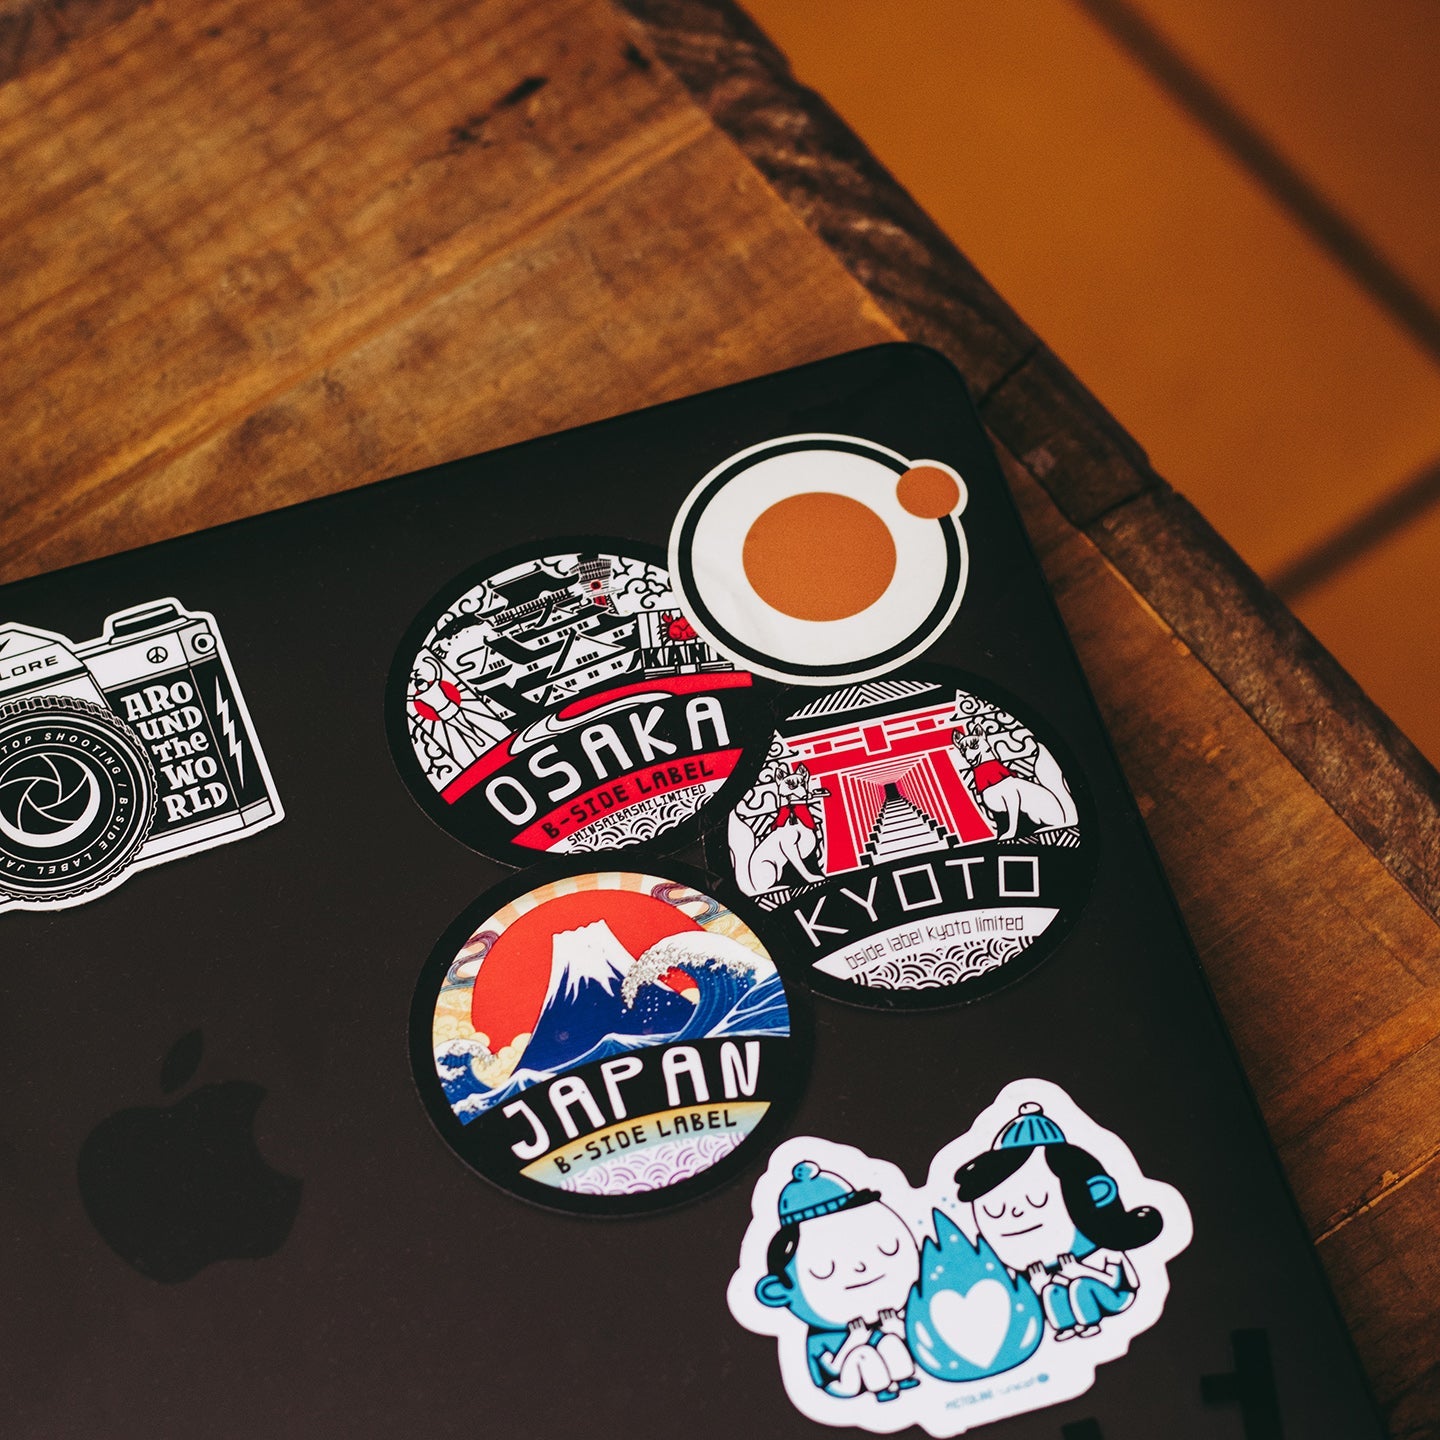 Shopping Stickers for Sale  Cute laptop stickers, Brand stickers